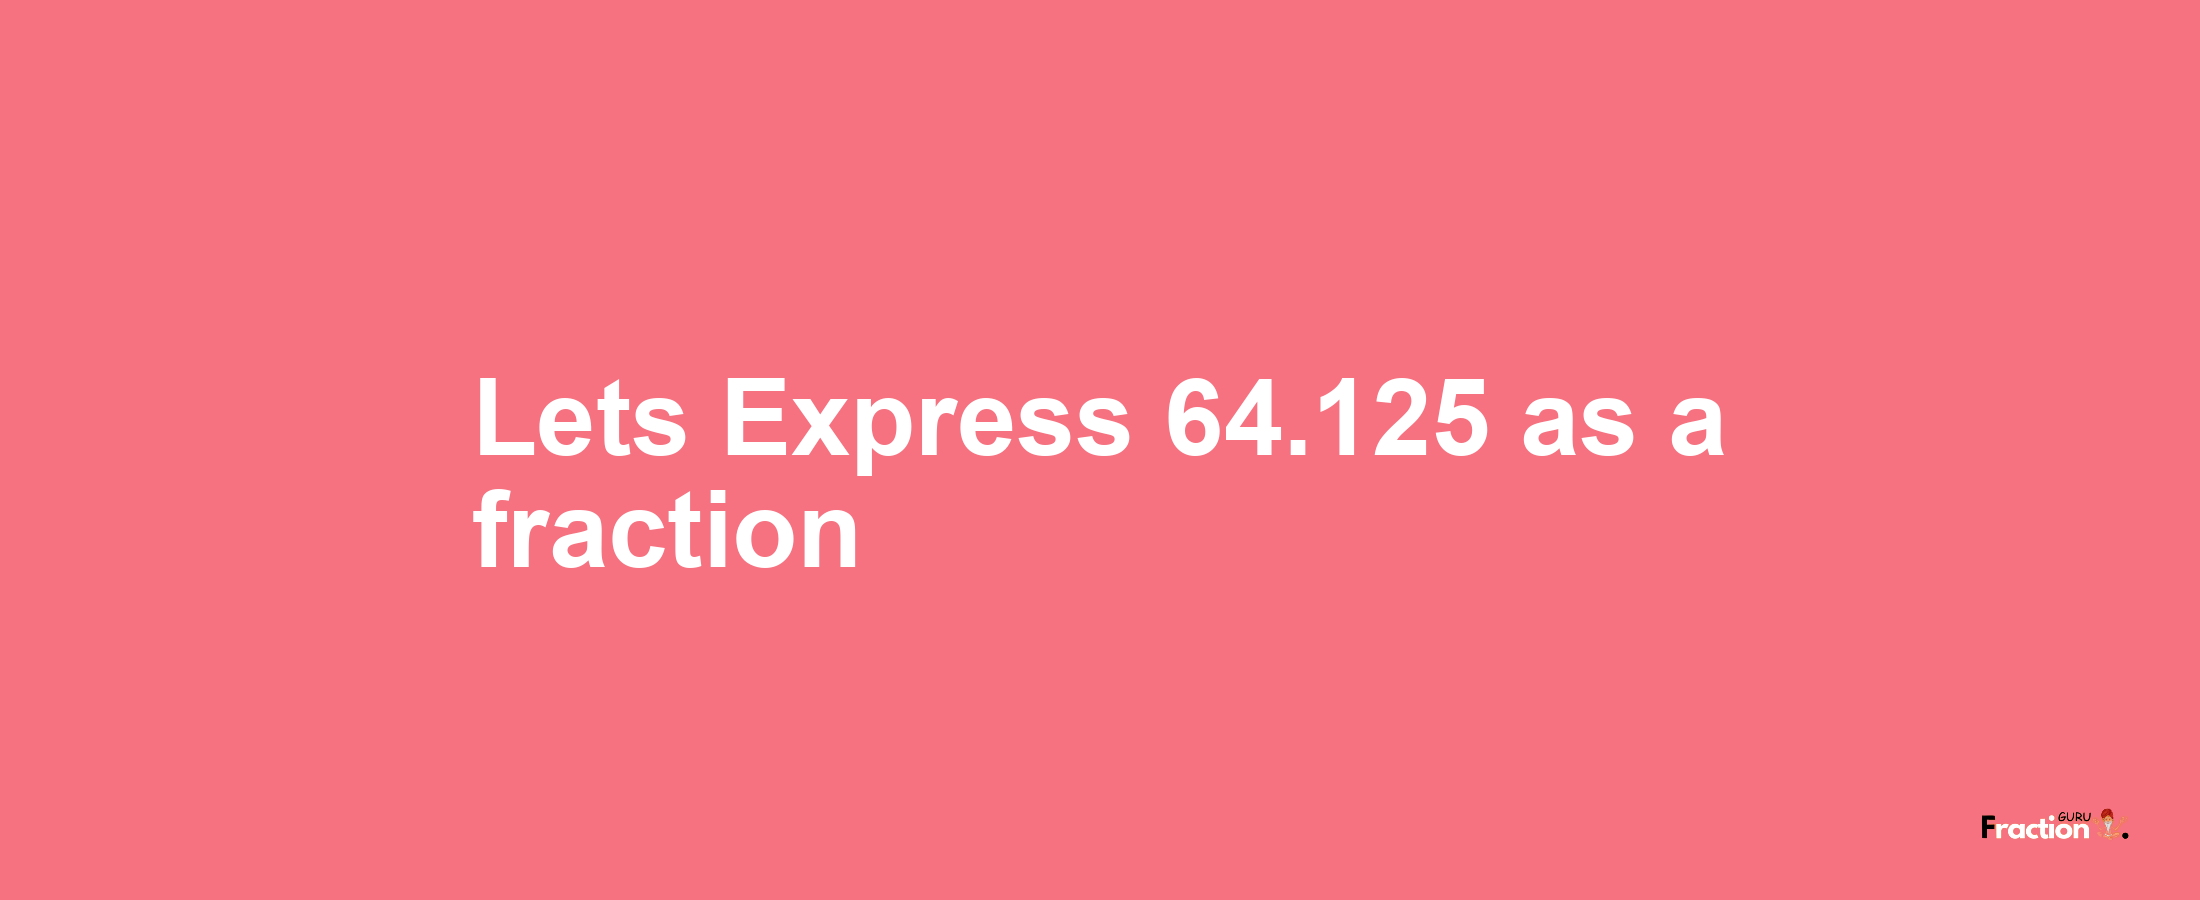 Lets Express 64.125 as afraction